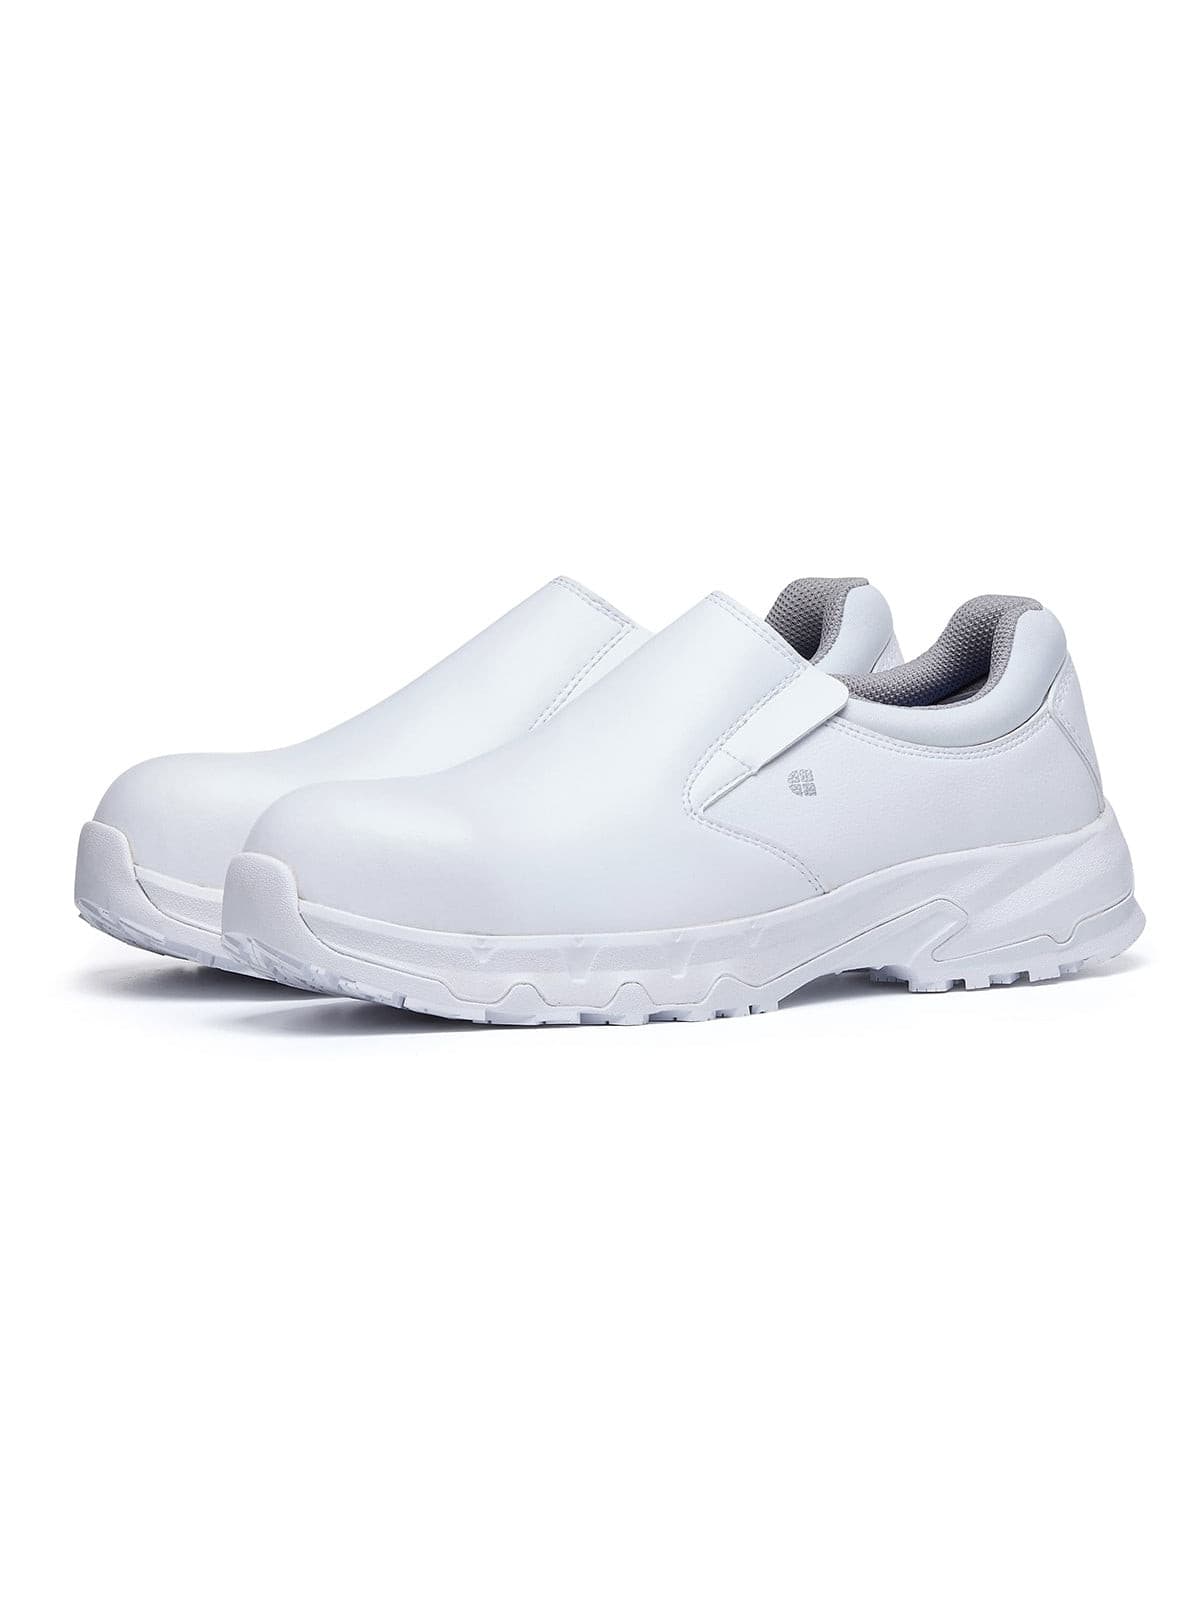 Unisex Safety Shoe Brandon White (S3) by Shoes For Crews -  ChefsCotton